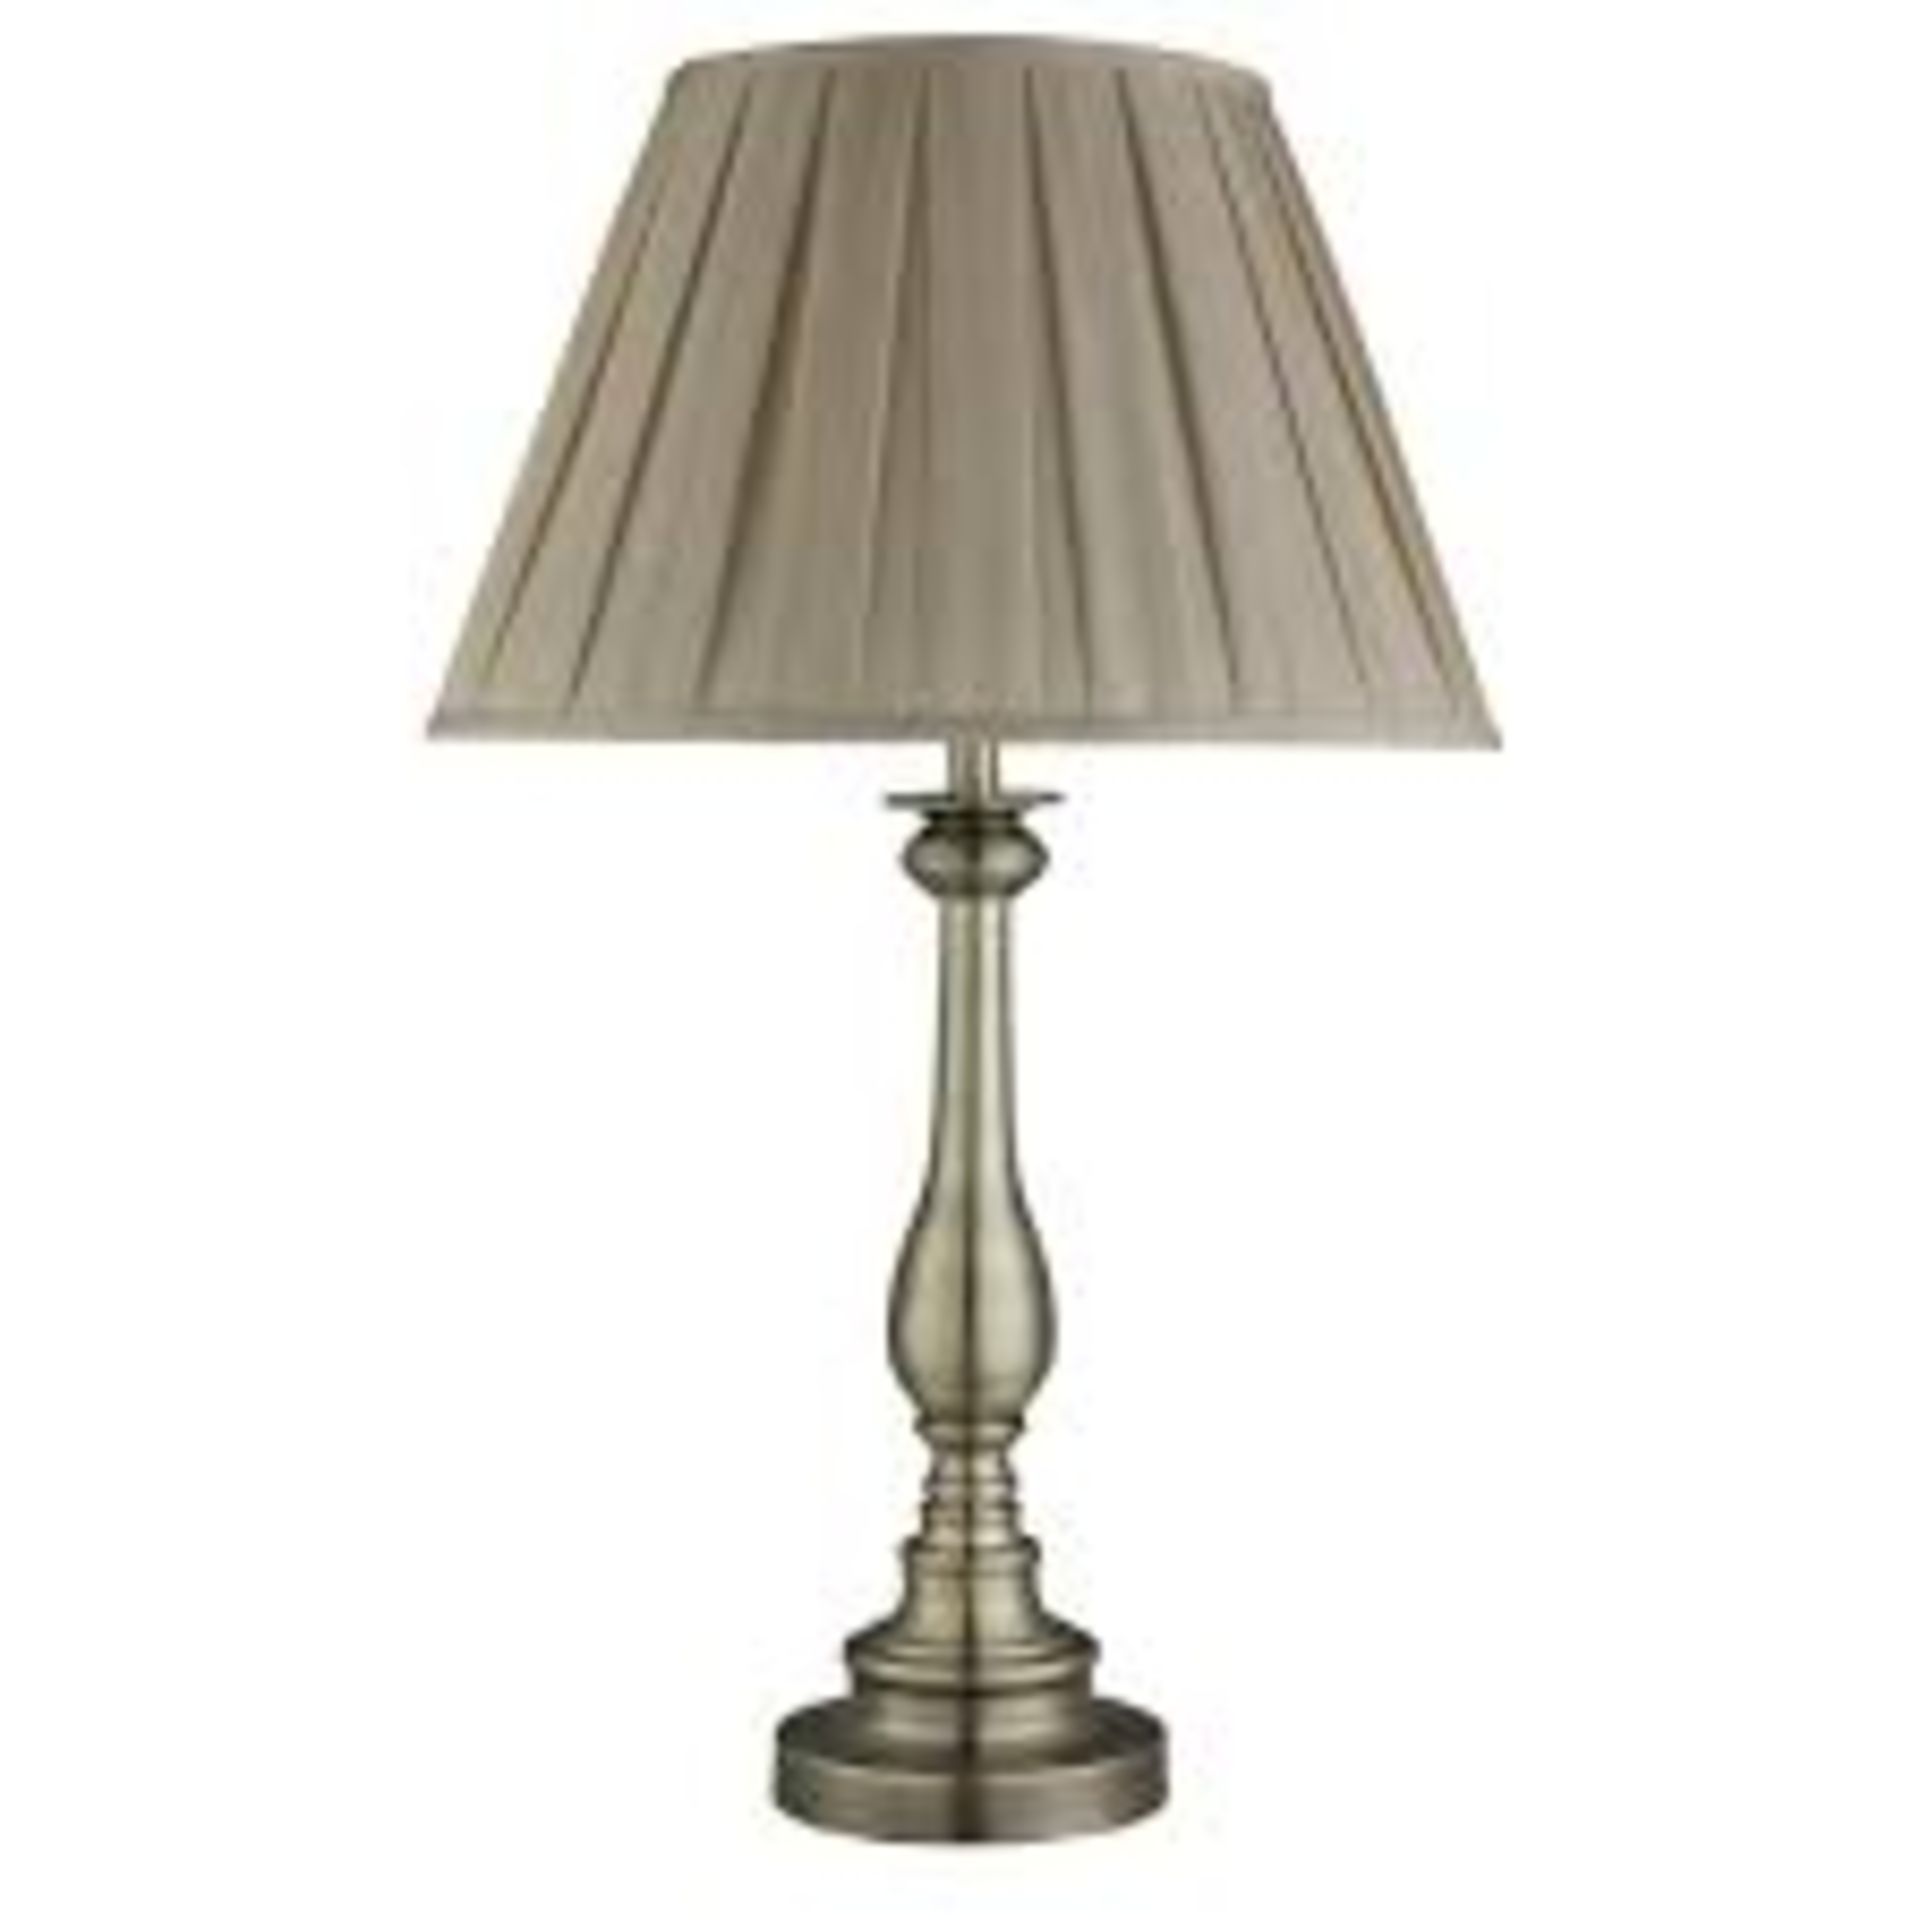 1 x Searchlight Spindle Table Lamp in Antique Brass - Ref: 4023AB - New and Boxed - RRP: £100 - Image 4 of 4